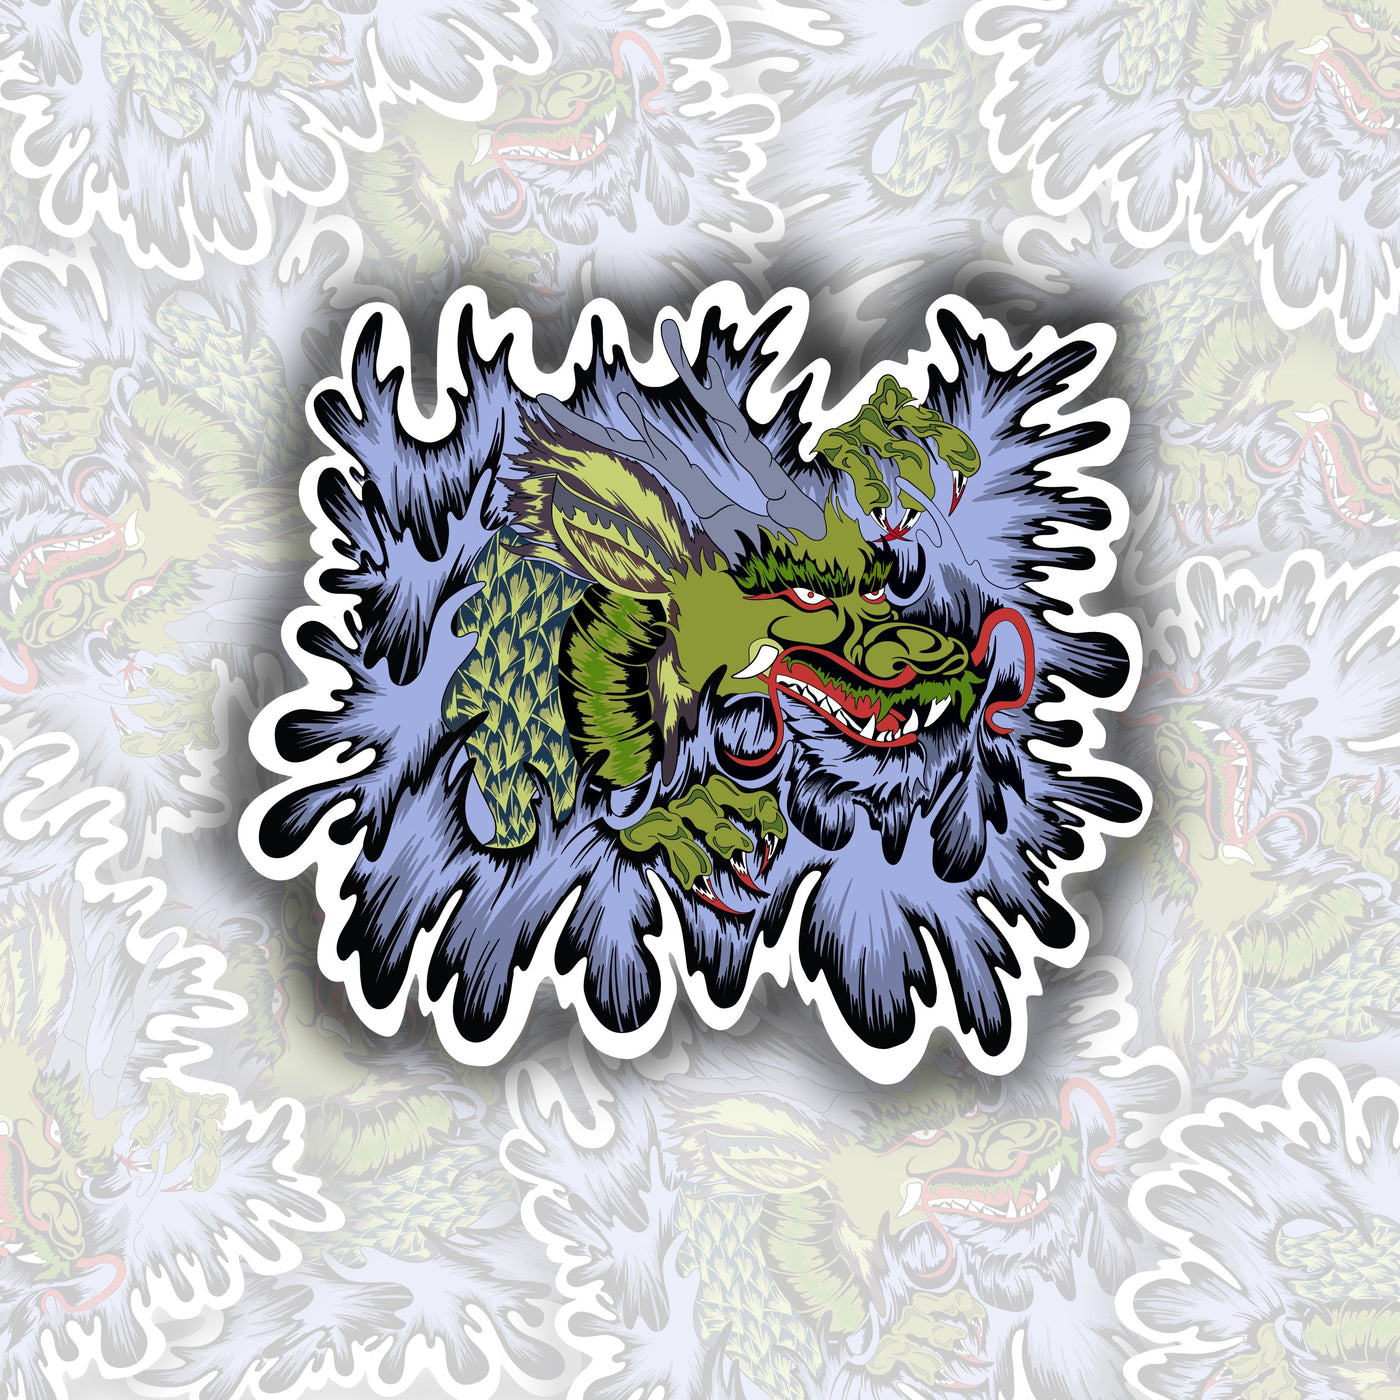 Green dragon with red mouth and white, sharp teeth. around the dragon are grey, blue, and black designs almost like waves crashing around him.